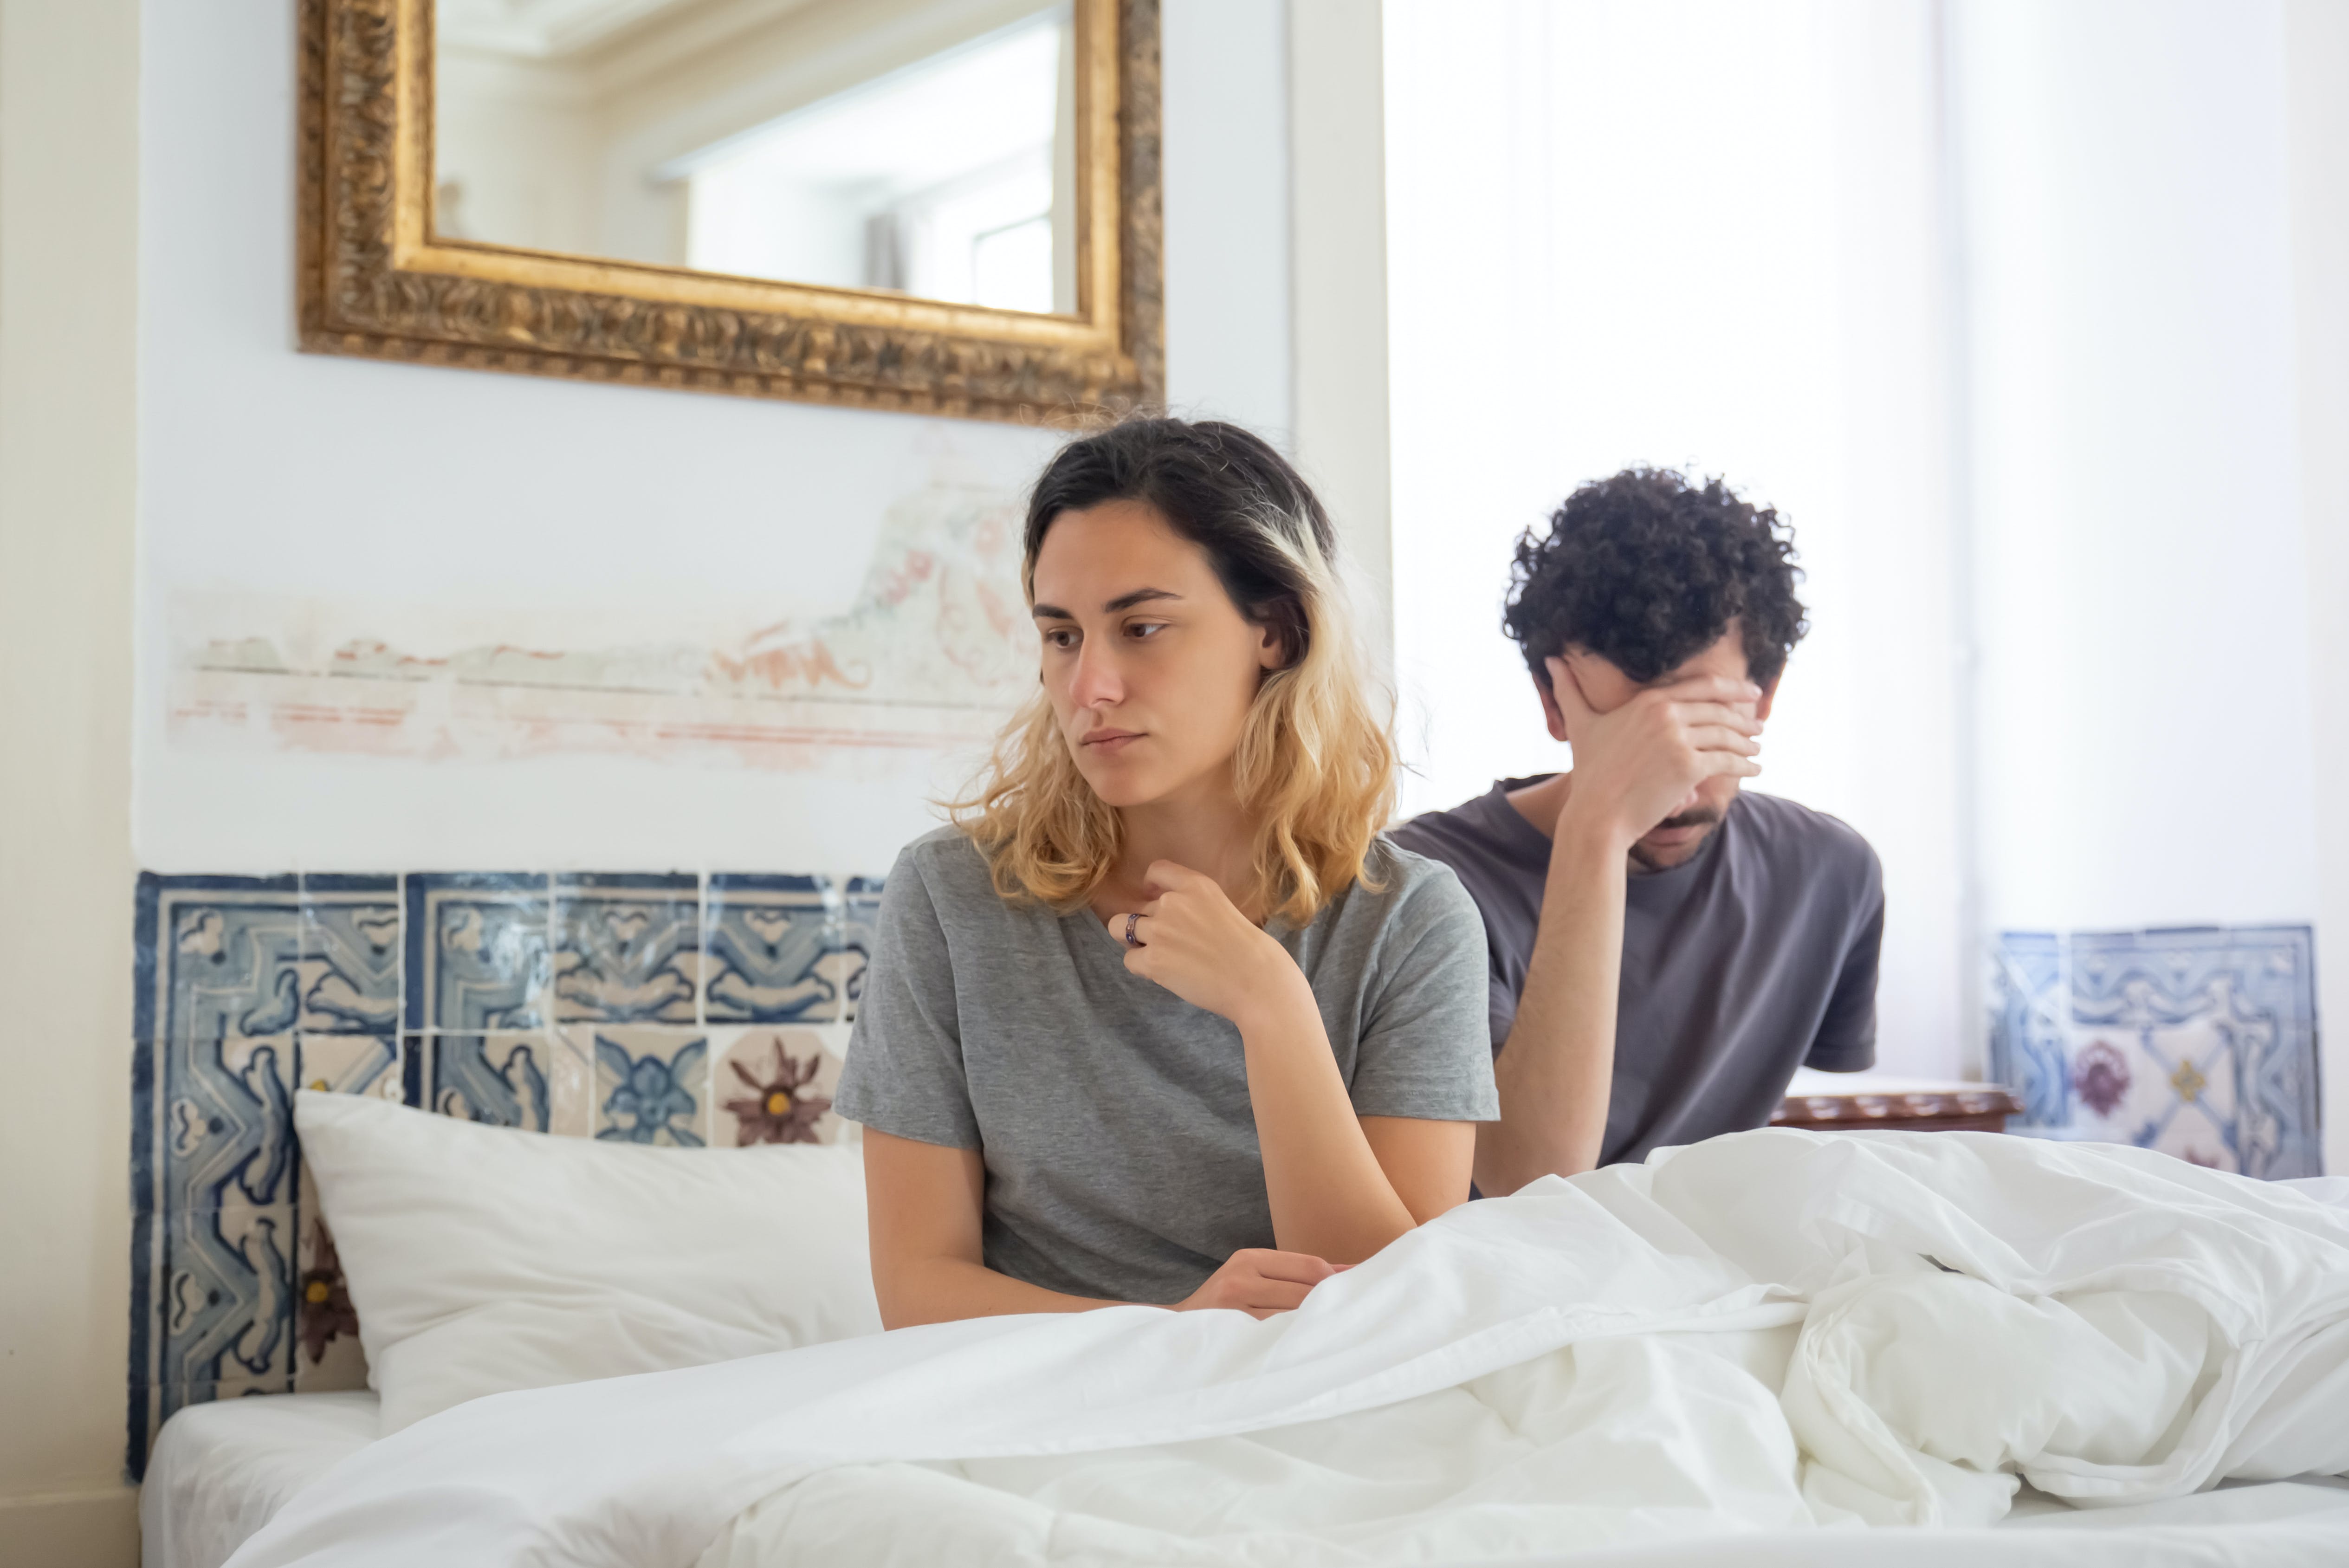 A couple arguing while sitting in bed | Source: Pexels